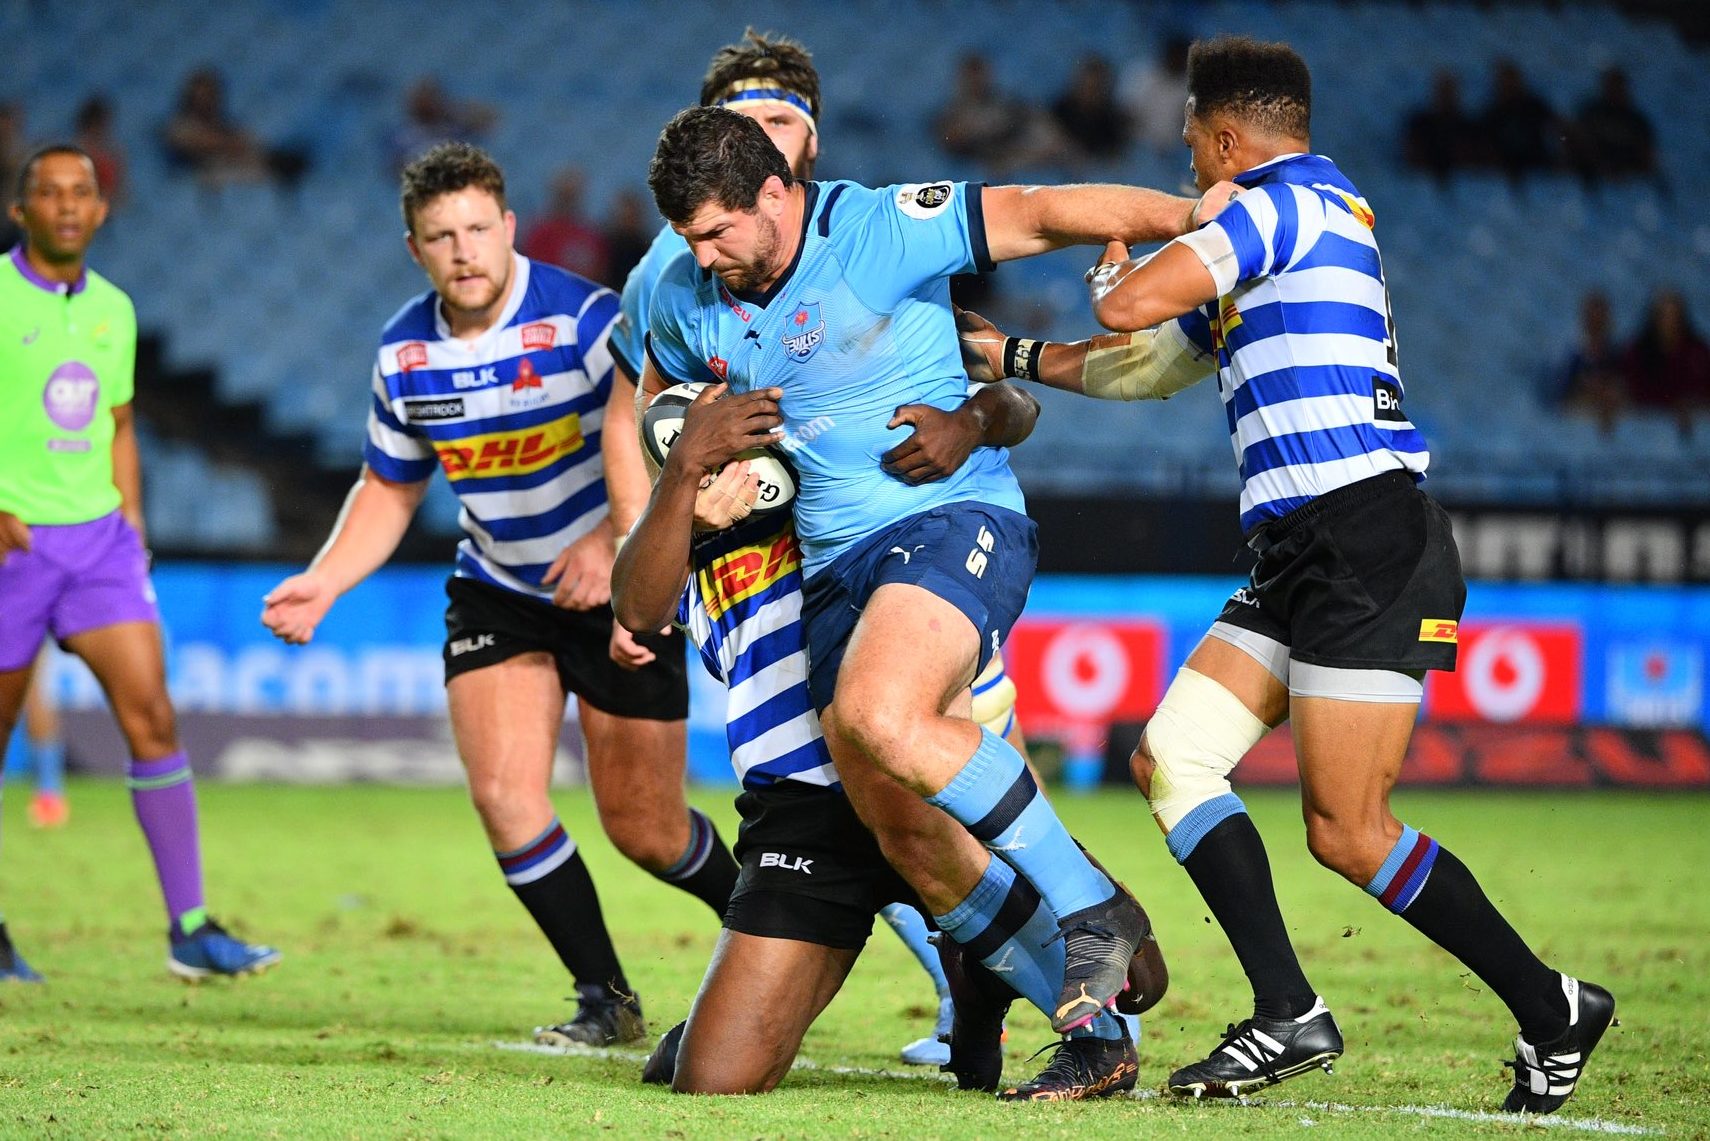 Currie Cup has reclaimed its identity